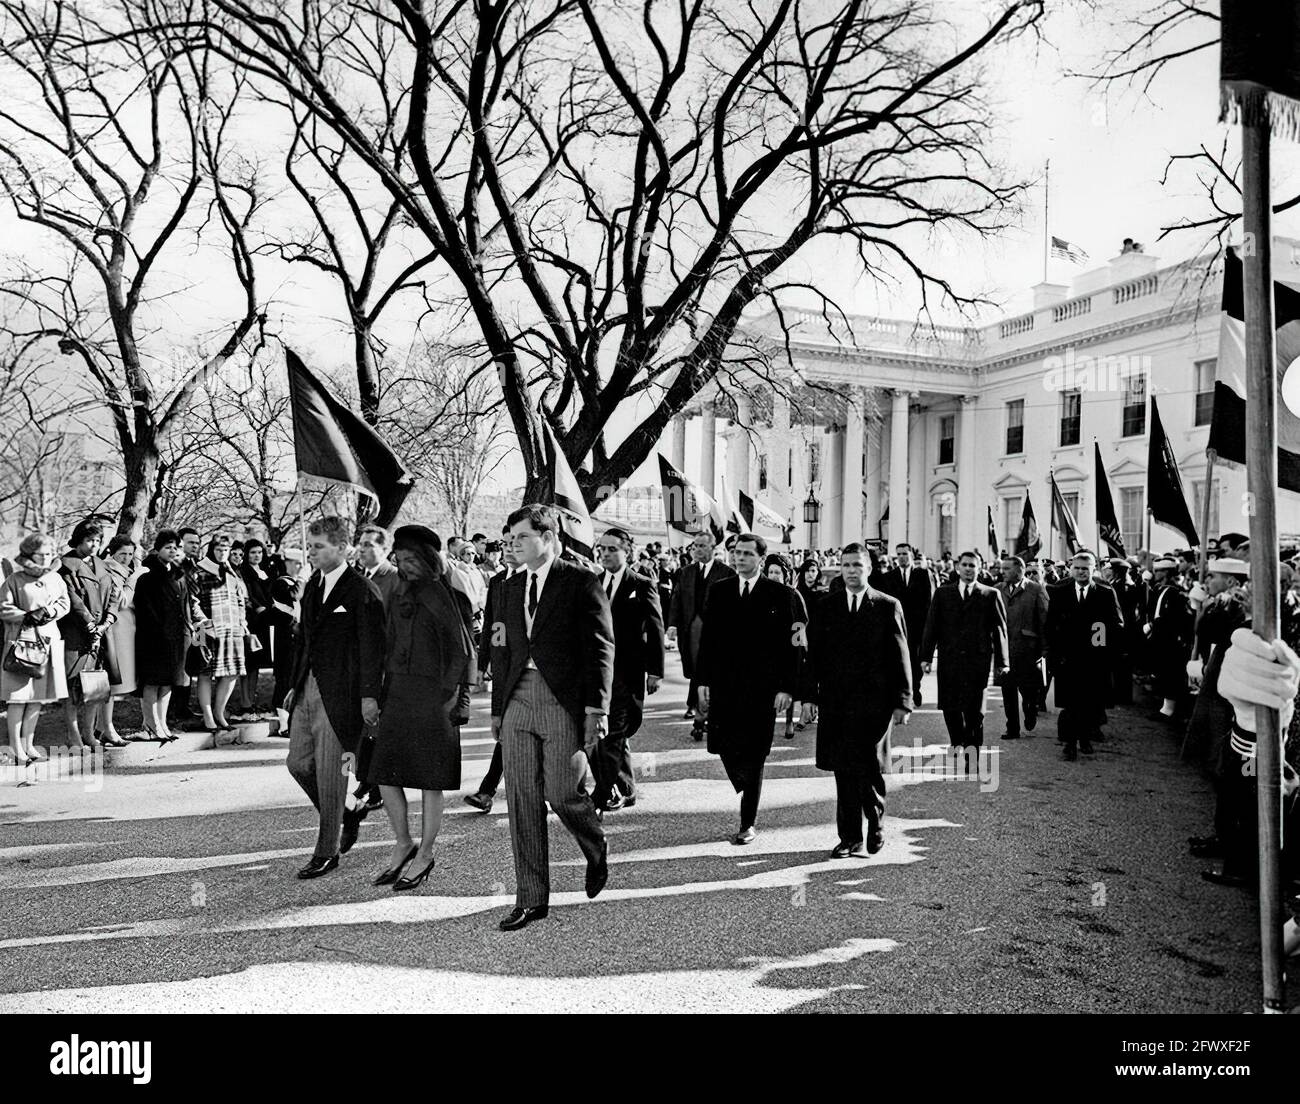 Members of the Kennedy family and others walk in the funeral procession of President John F. Kennedy to the Cathedral of St. Matthew the Apostle. Those walking include: Attorney General, Robert F. Kennedy; Jacqueline Kennedy; Senator Edward M. Kennedy (Massachusetts); Jamie Auchincloss (partially hidden); Director of the Peace Corps, R. Sargent Shriver; Steve Smith; President Lyndon B. Johnson; First Lady Lady Bird Johnson; Lucy Baines Johnson; White House Secret Service agents, Clint Hill, Paul Landis, Toby Chandler, Stu Stout, and James J. Rowley. Mourners and members of the color guard line Stock Photo